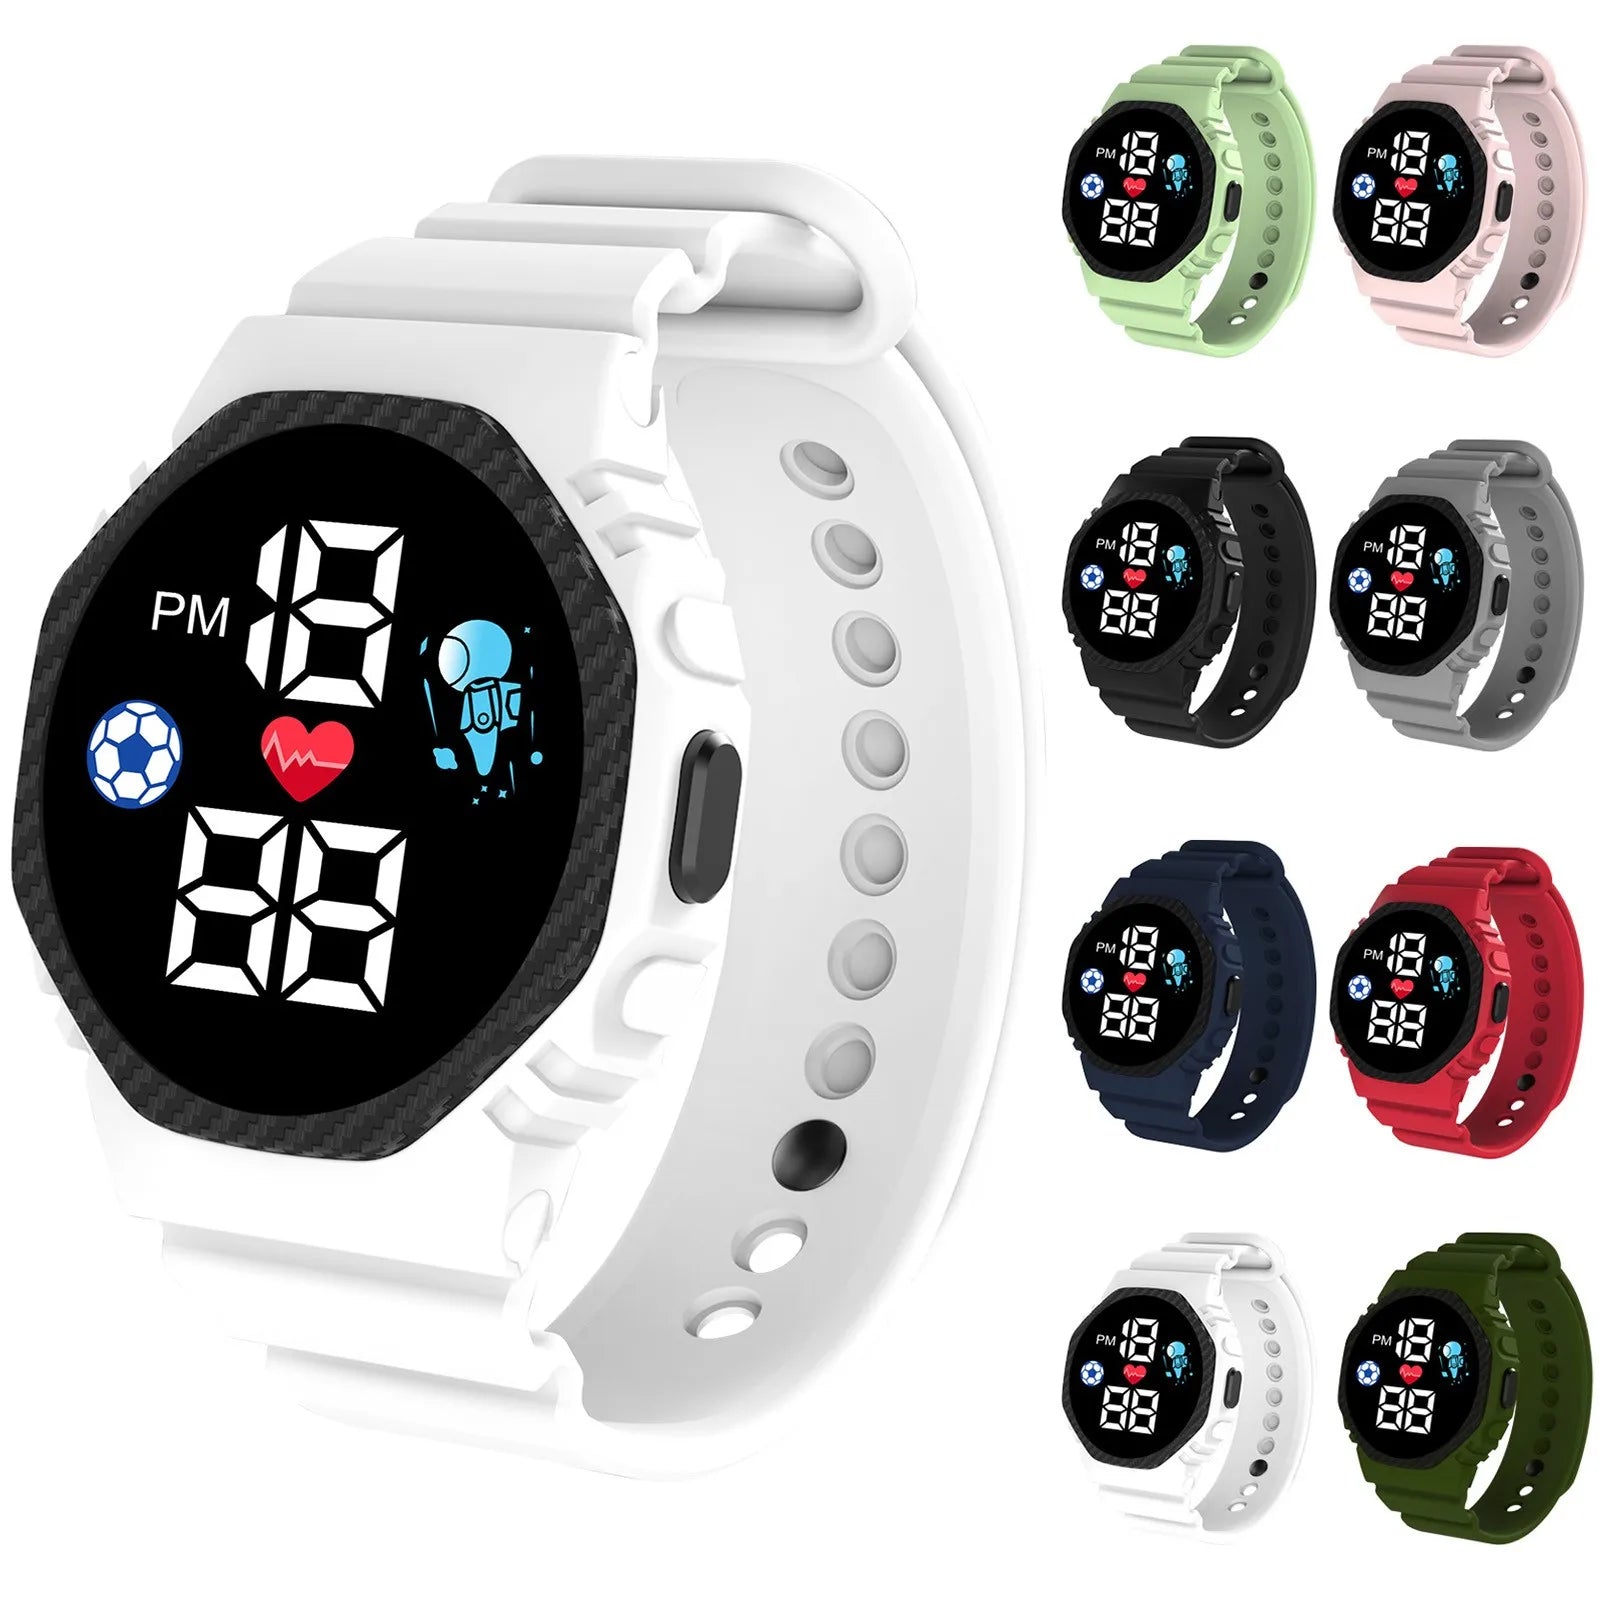 Children's Electronic Watches Life Waterproof Watch For Boys And Girls Fashion Cartoon LED Digital Wristwatch relogio infantil